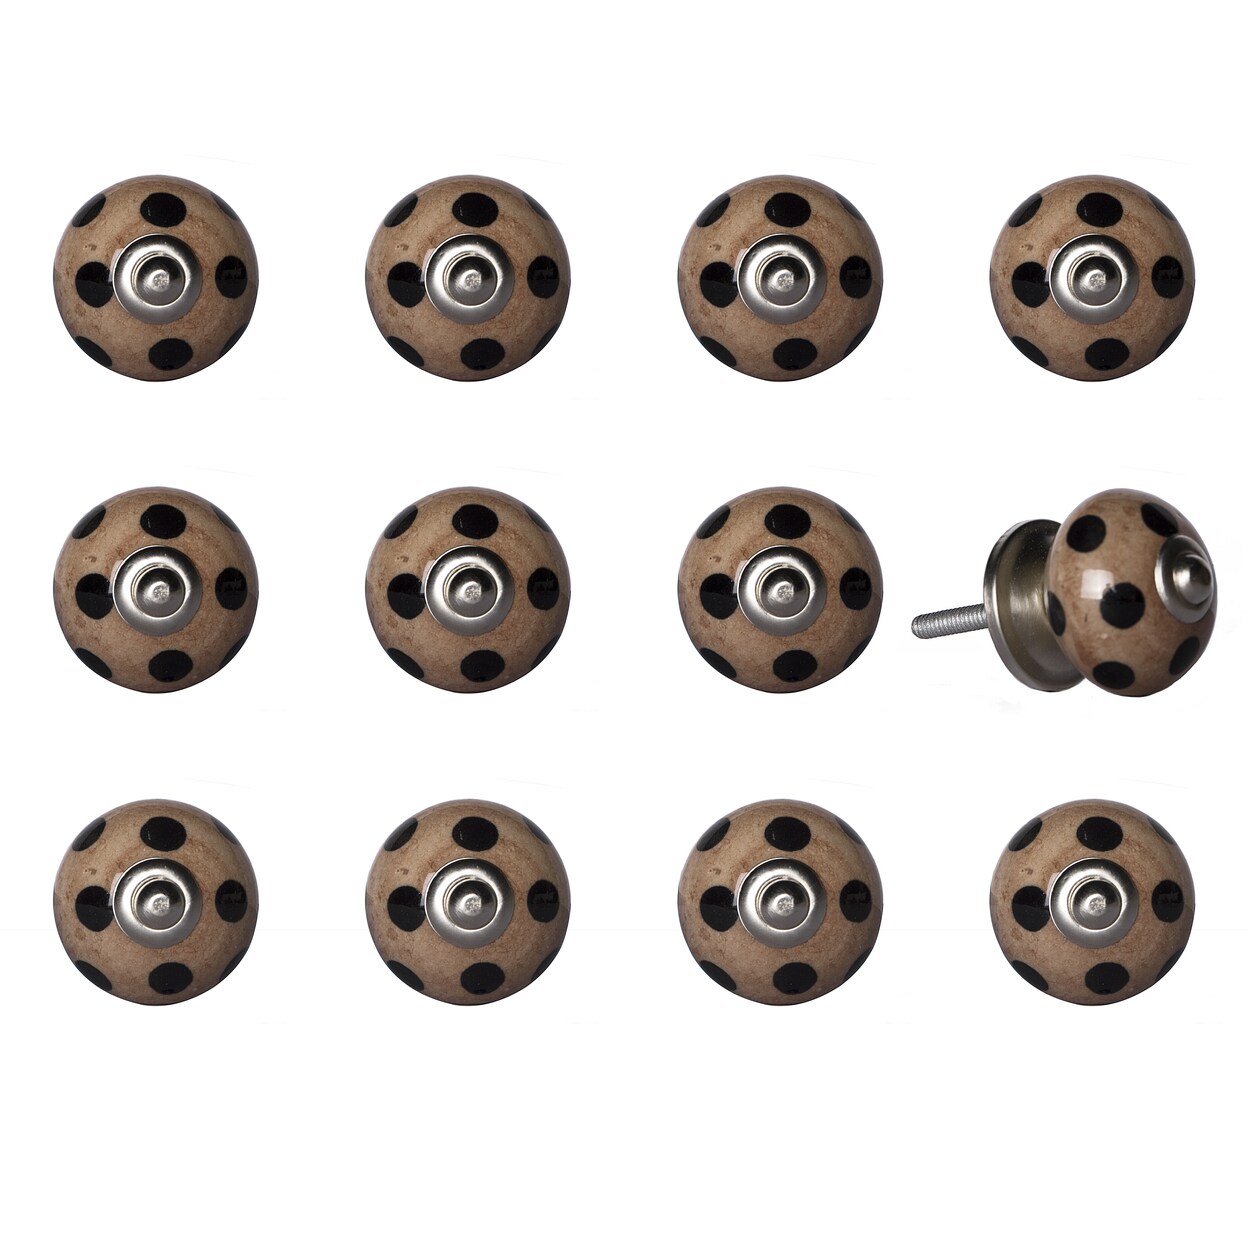 Knob-It    Classic Cabinet and Drawer Knobs  12-Piece  14